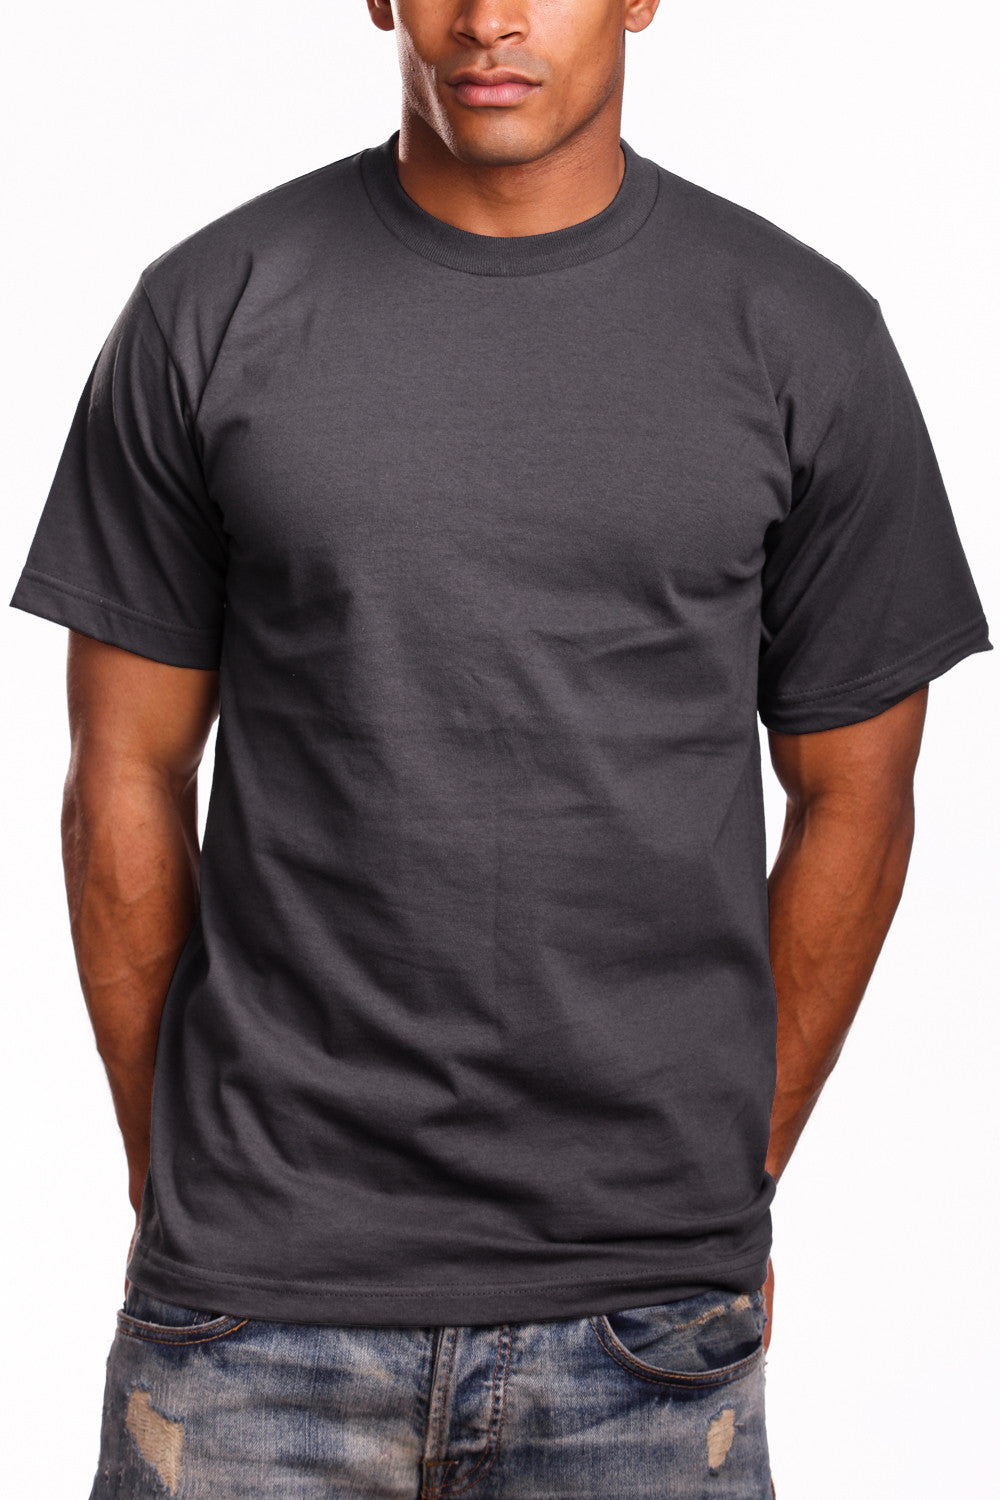 Experience the Super Heavy Charcoal Grey T-Shirt: Crafted with a snug-fit neckline and Lycra-reinforced collar for lasting style and quality. Available in sizes 2X-5XL and a wide range of colors. Fabric: 100% Cotton (Solid), Cotton/Poly blend (Grey), 6.7 oz weight.